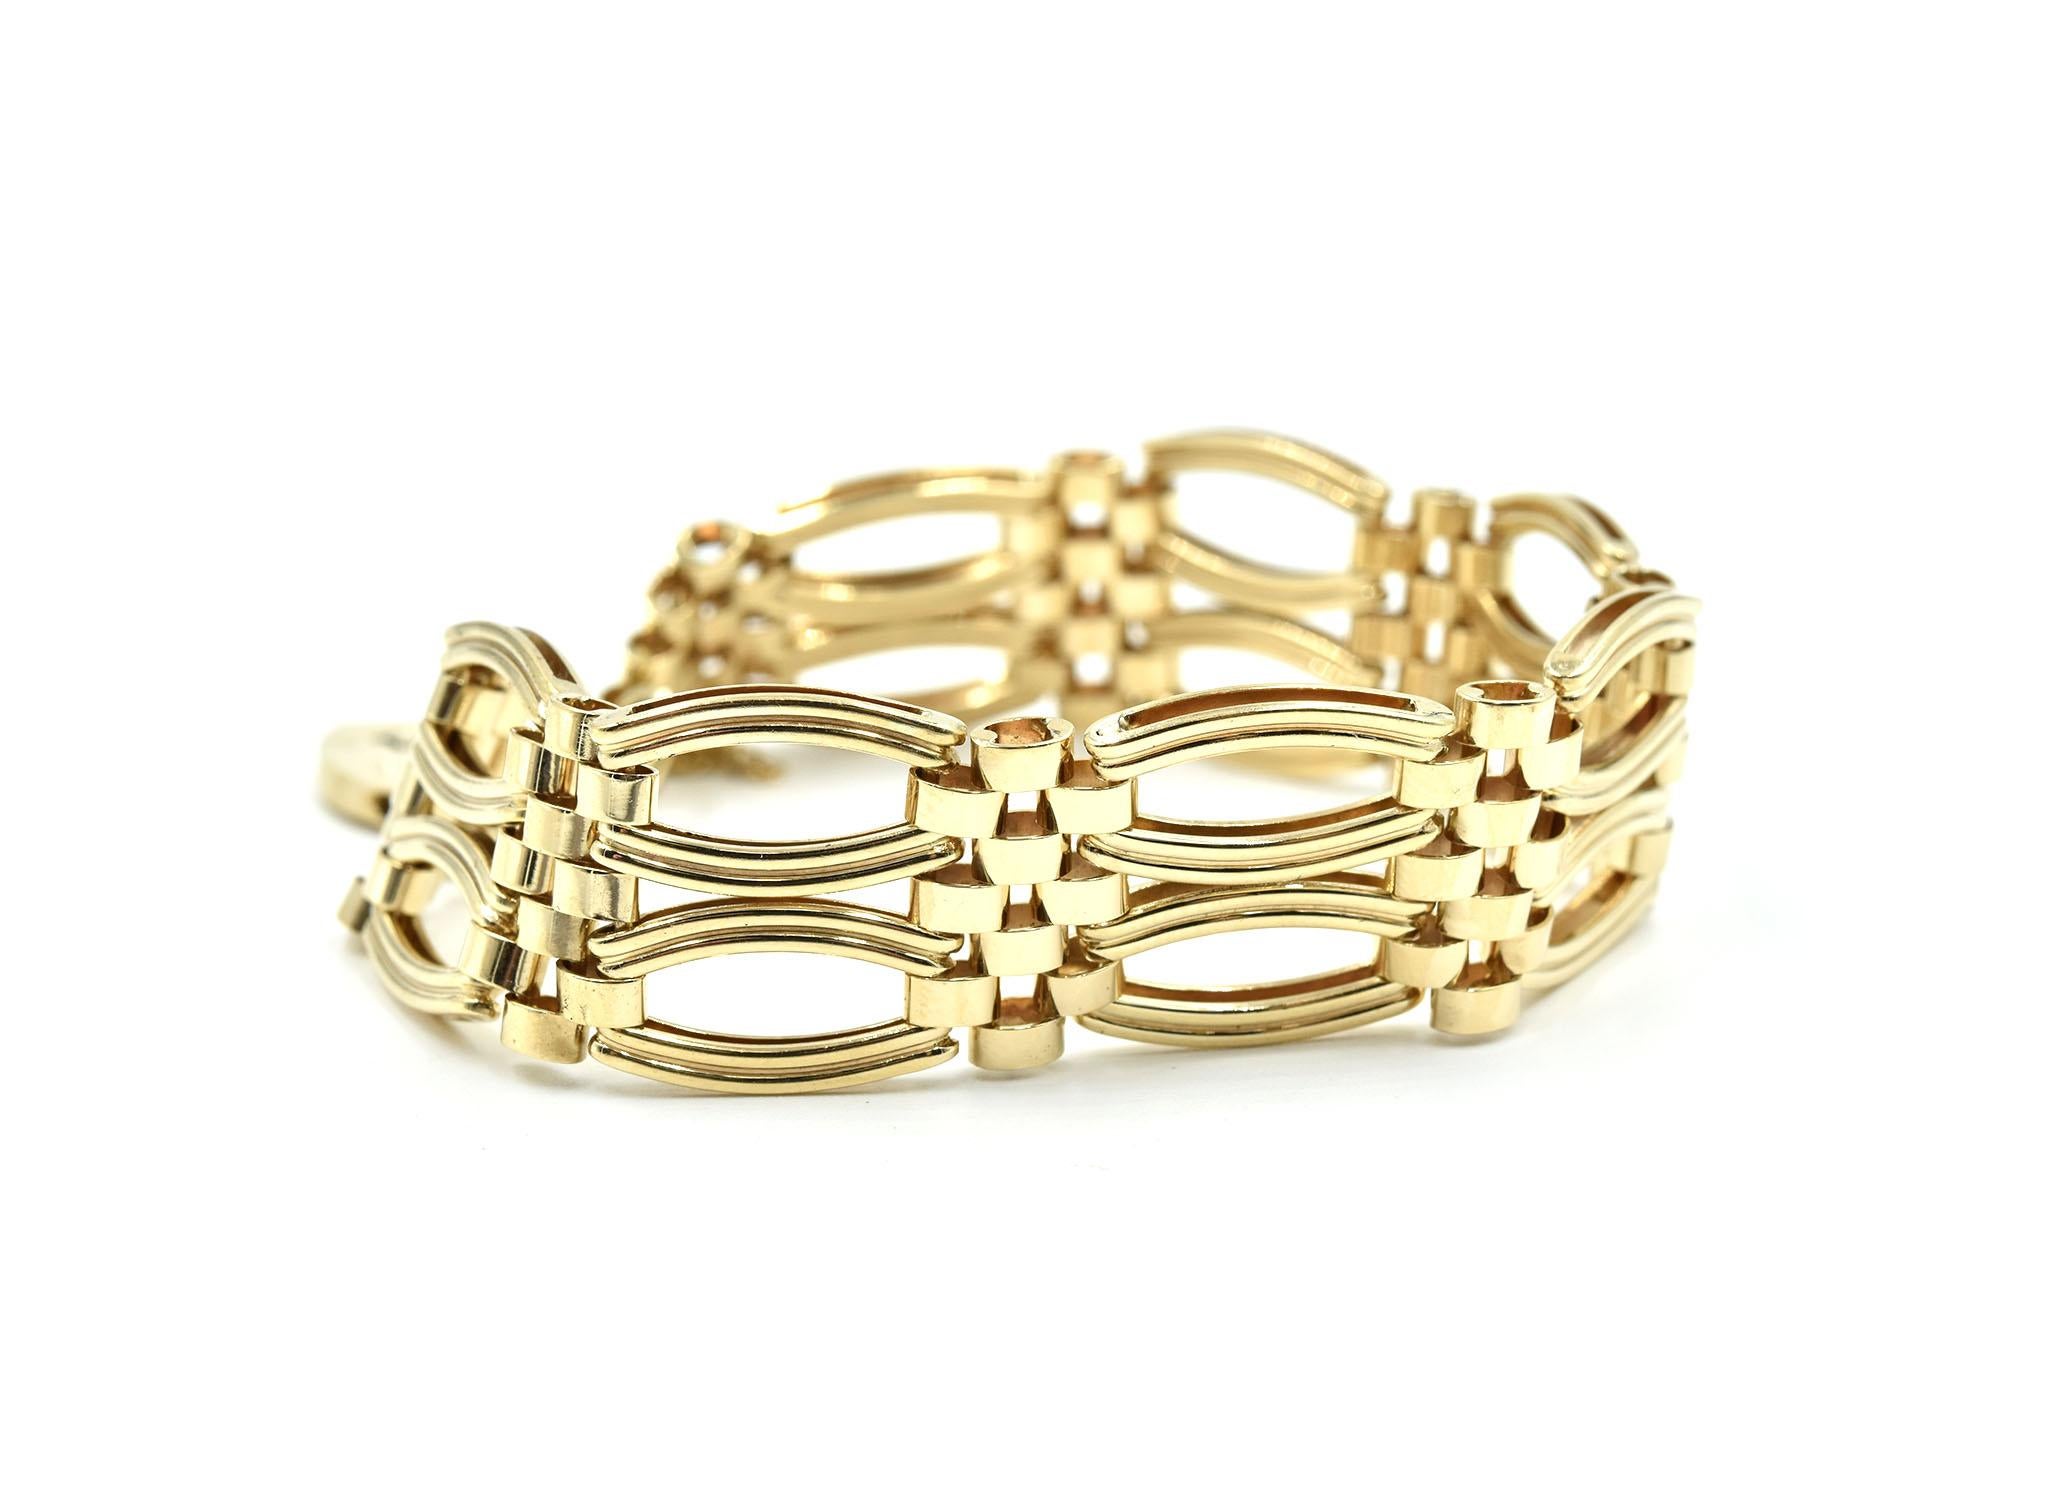 This is a vintage English style bracelet made in 9k yellow gold with a locking heart in the center. The heart has a lever that if pushed releases the heart. The bracelet has a security chain. The bracelet will fit up to a 7.5” inch wrist and the